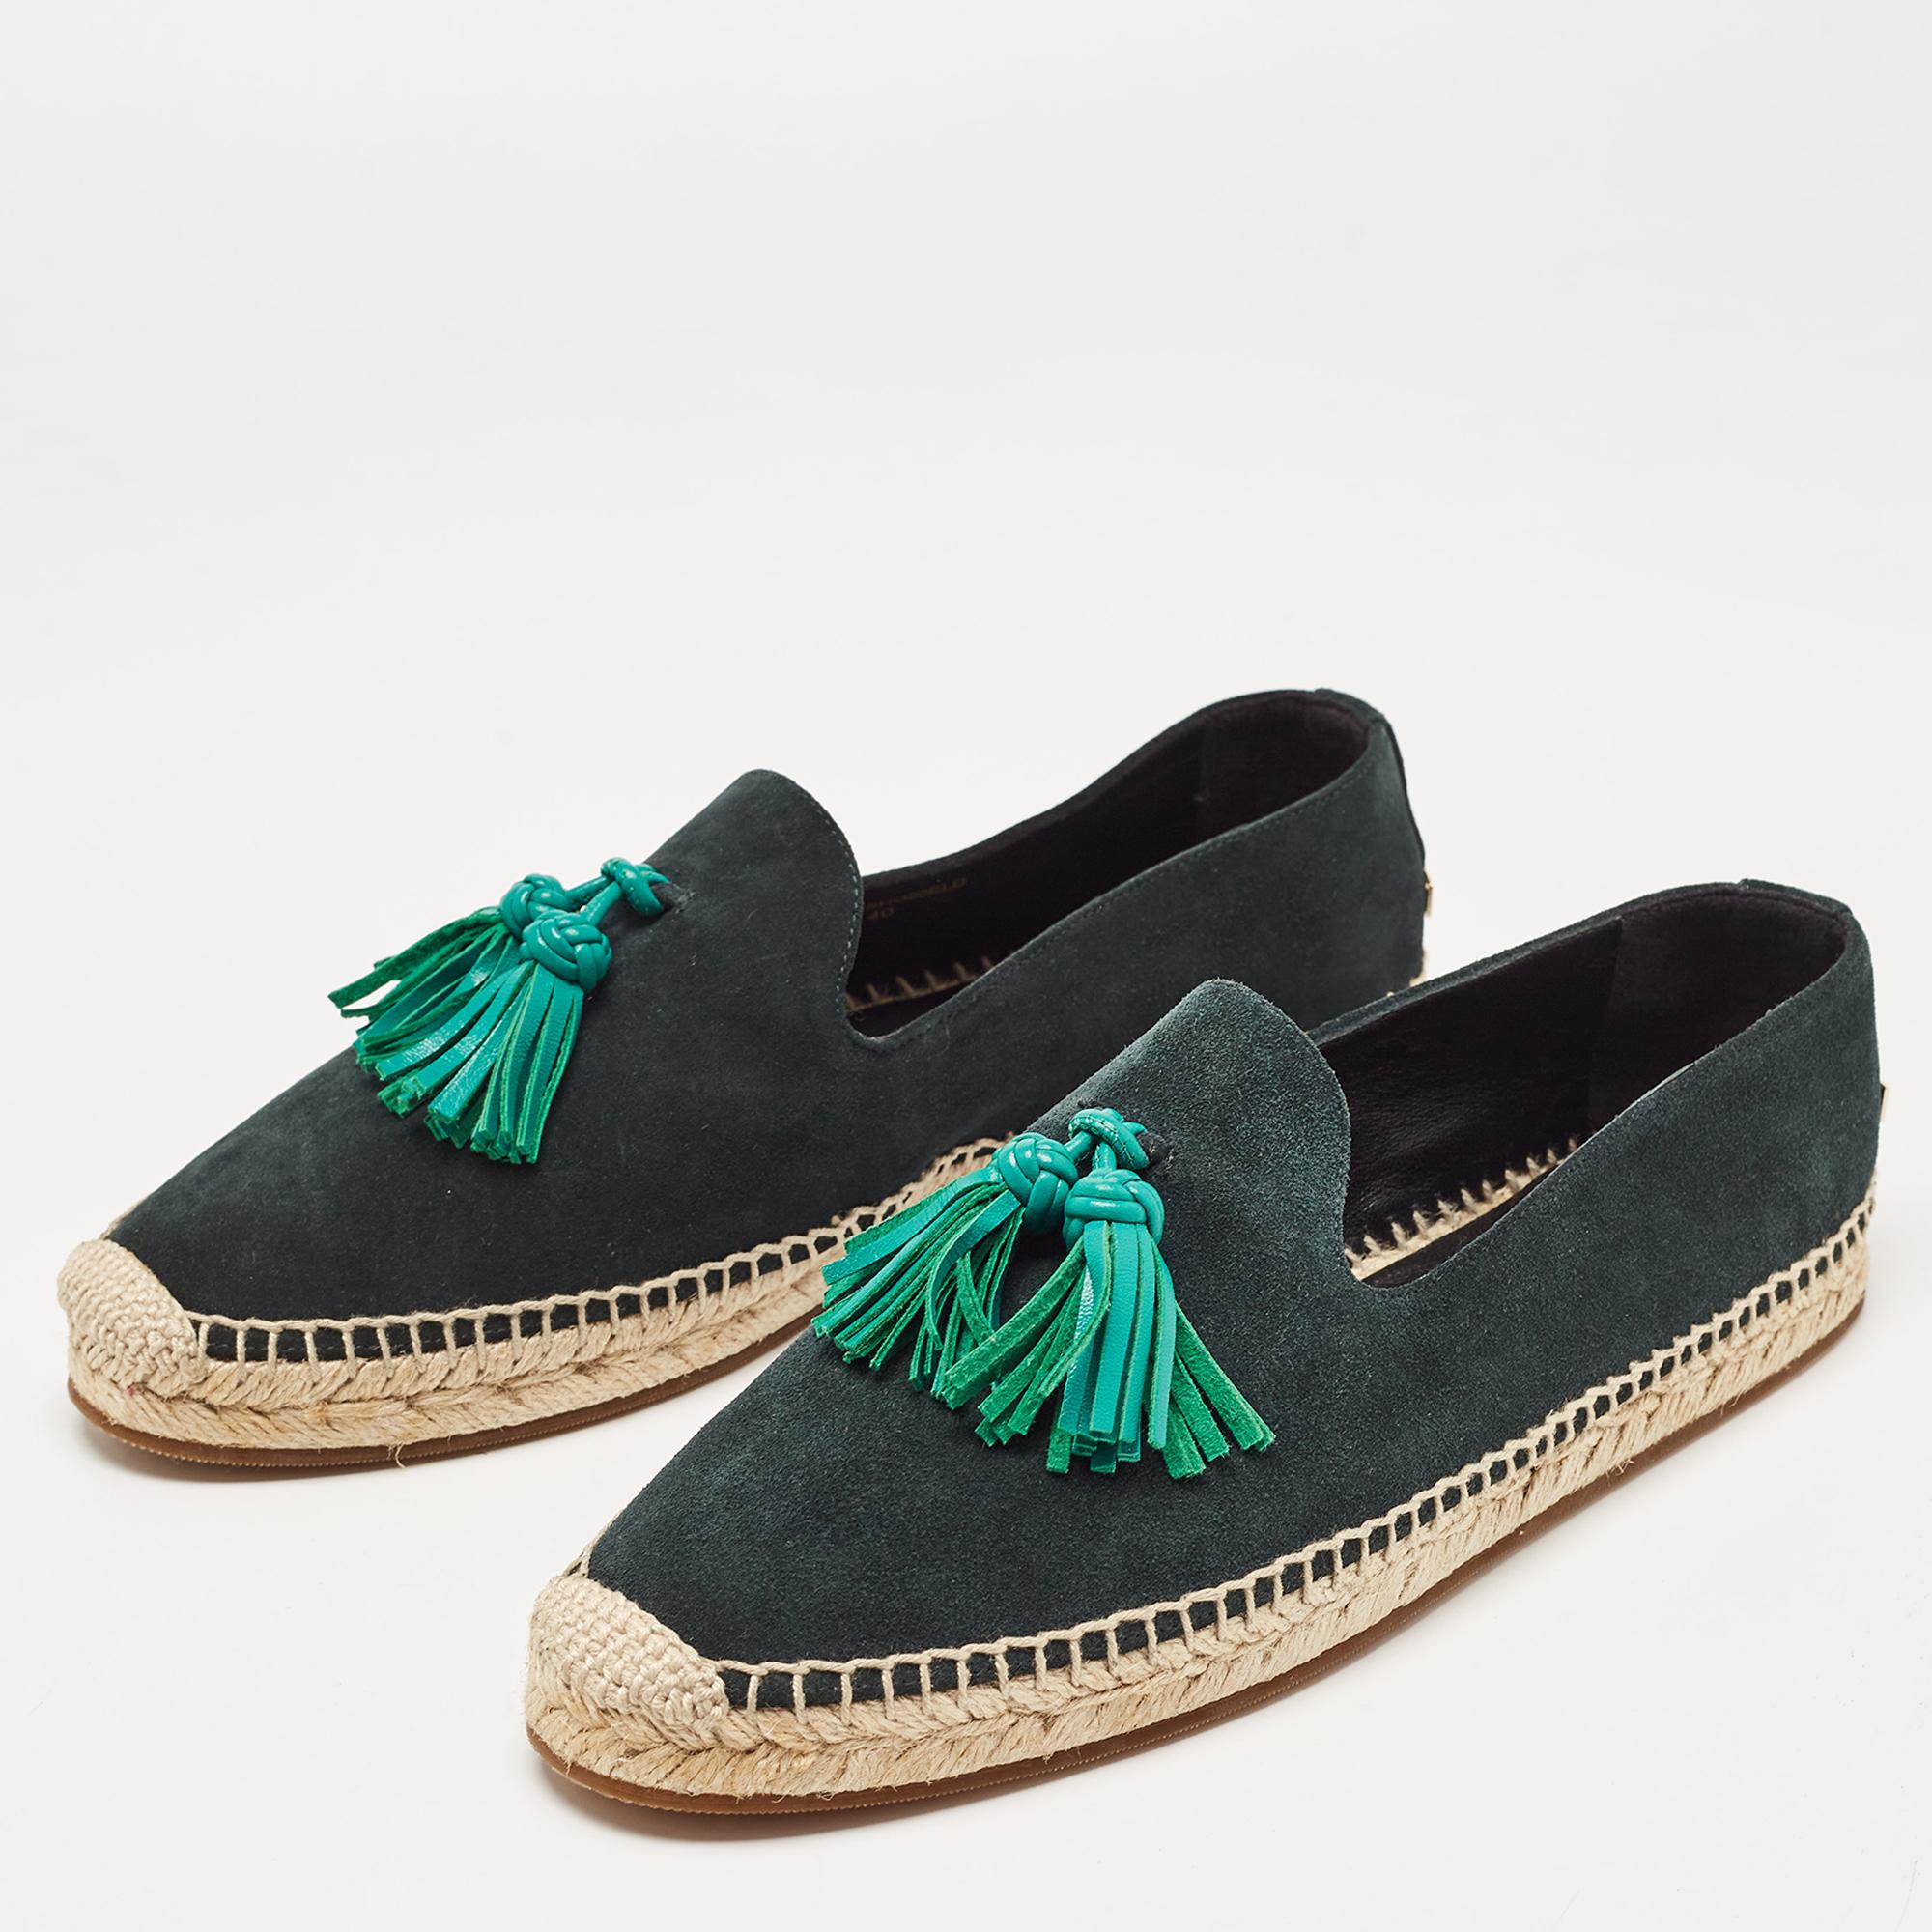 These designer espadrilles exude cool summer vibes while giving all the comfort to your feet. They bring along a well-built silhouette and the house's signature aesthetics. Wear them with anything: jeans, dresses, shorts.

